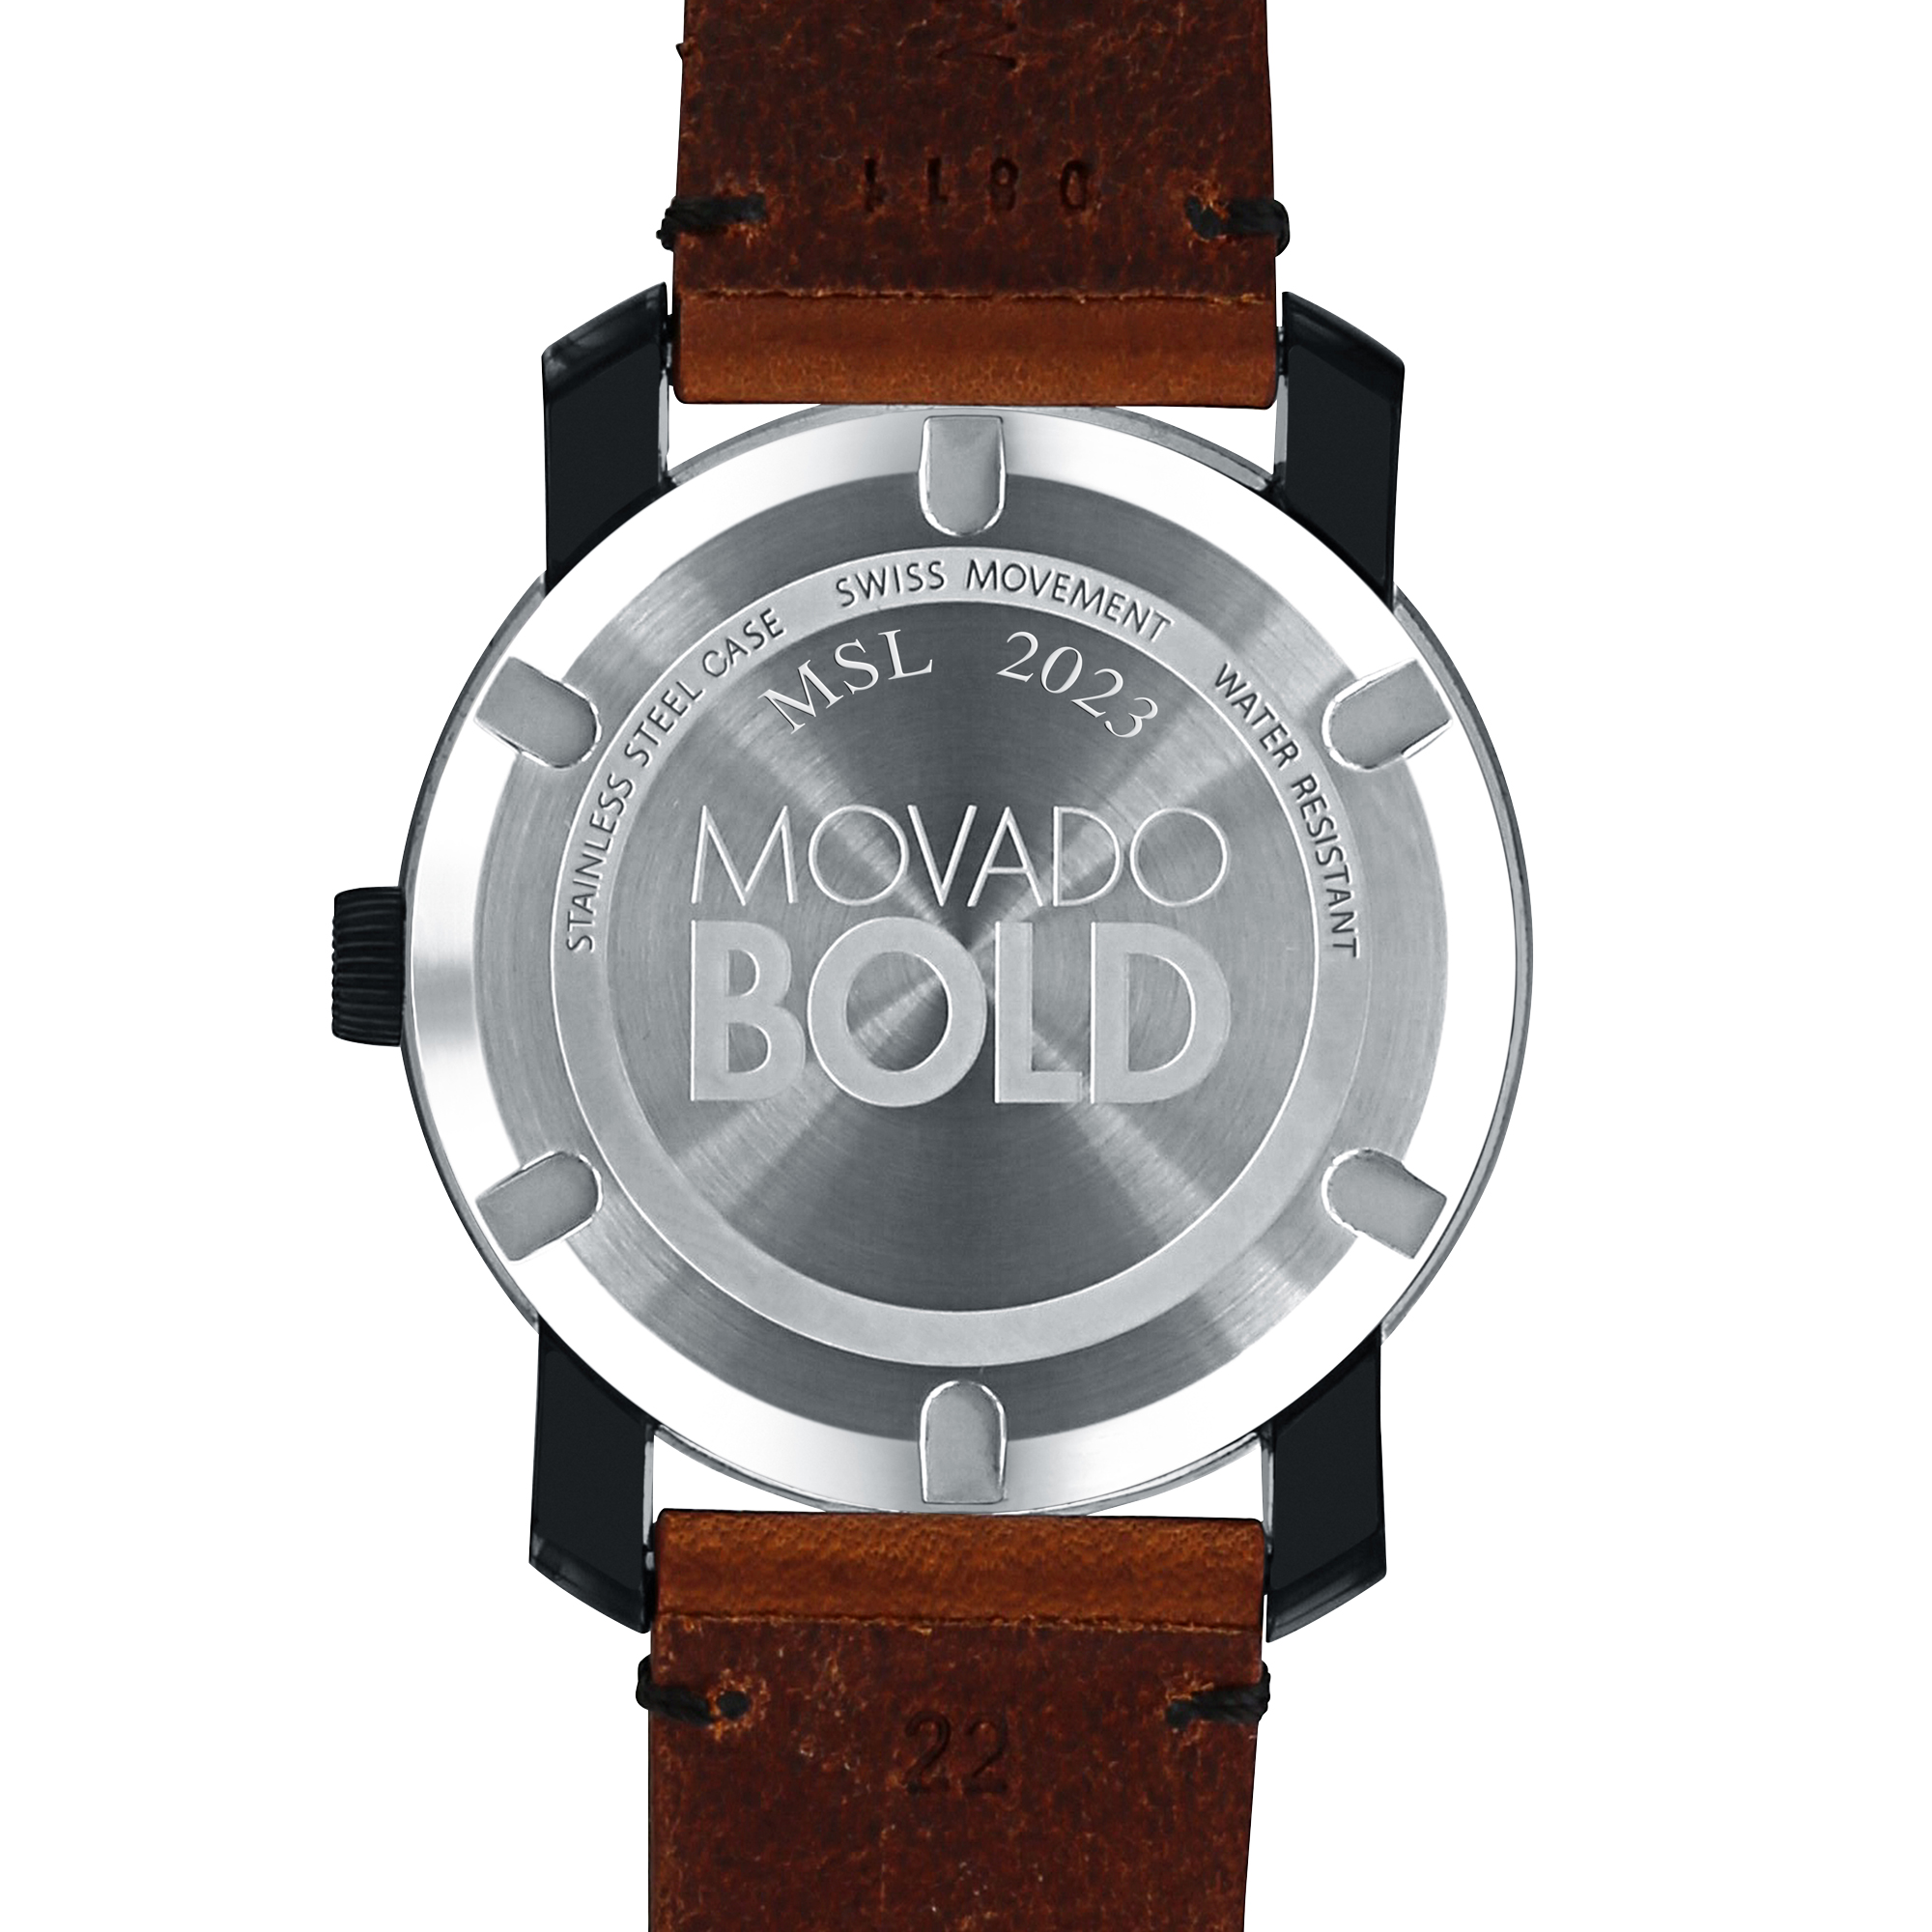 Troy University Men's Movado BOLD with Brown Leather Strap - Image 3